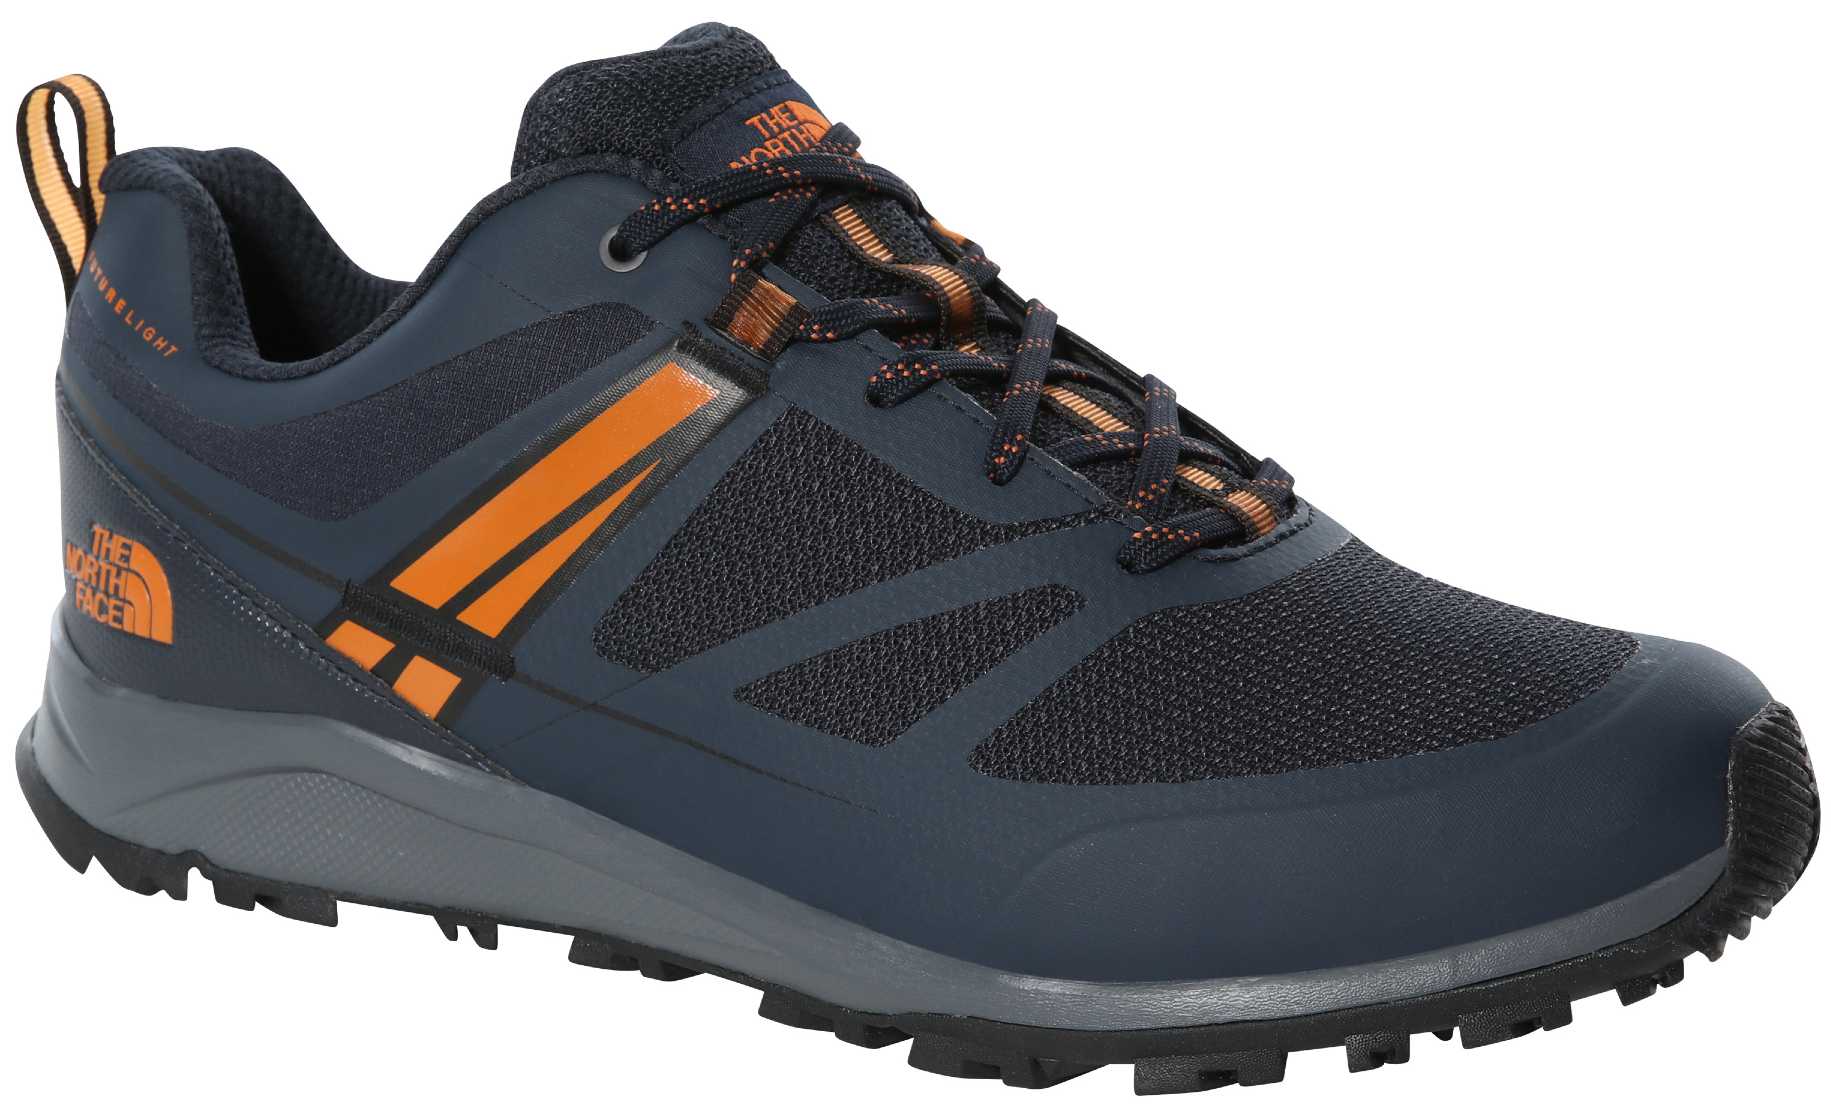 The North Face Litewave FutureLight Walking Shoes